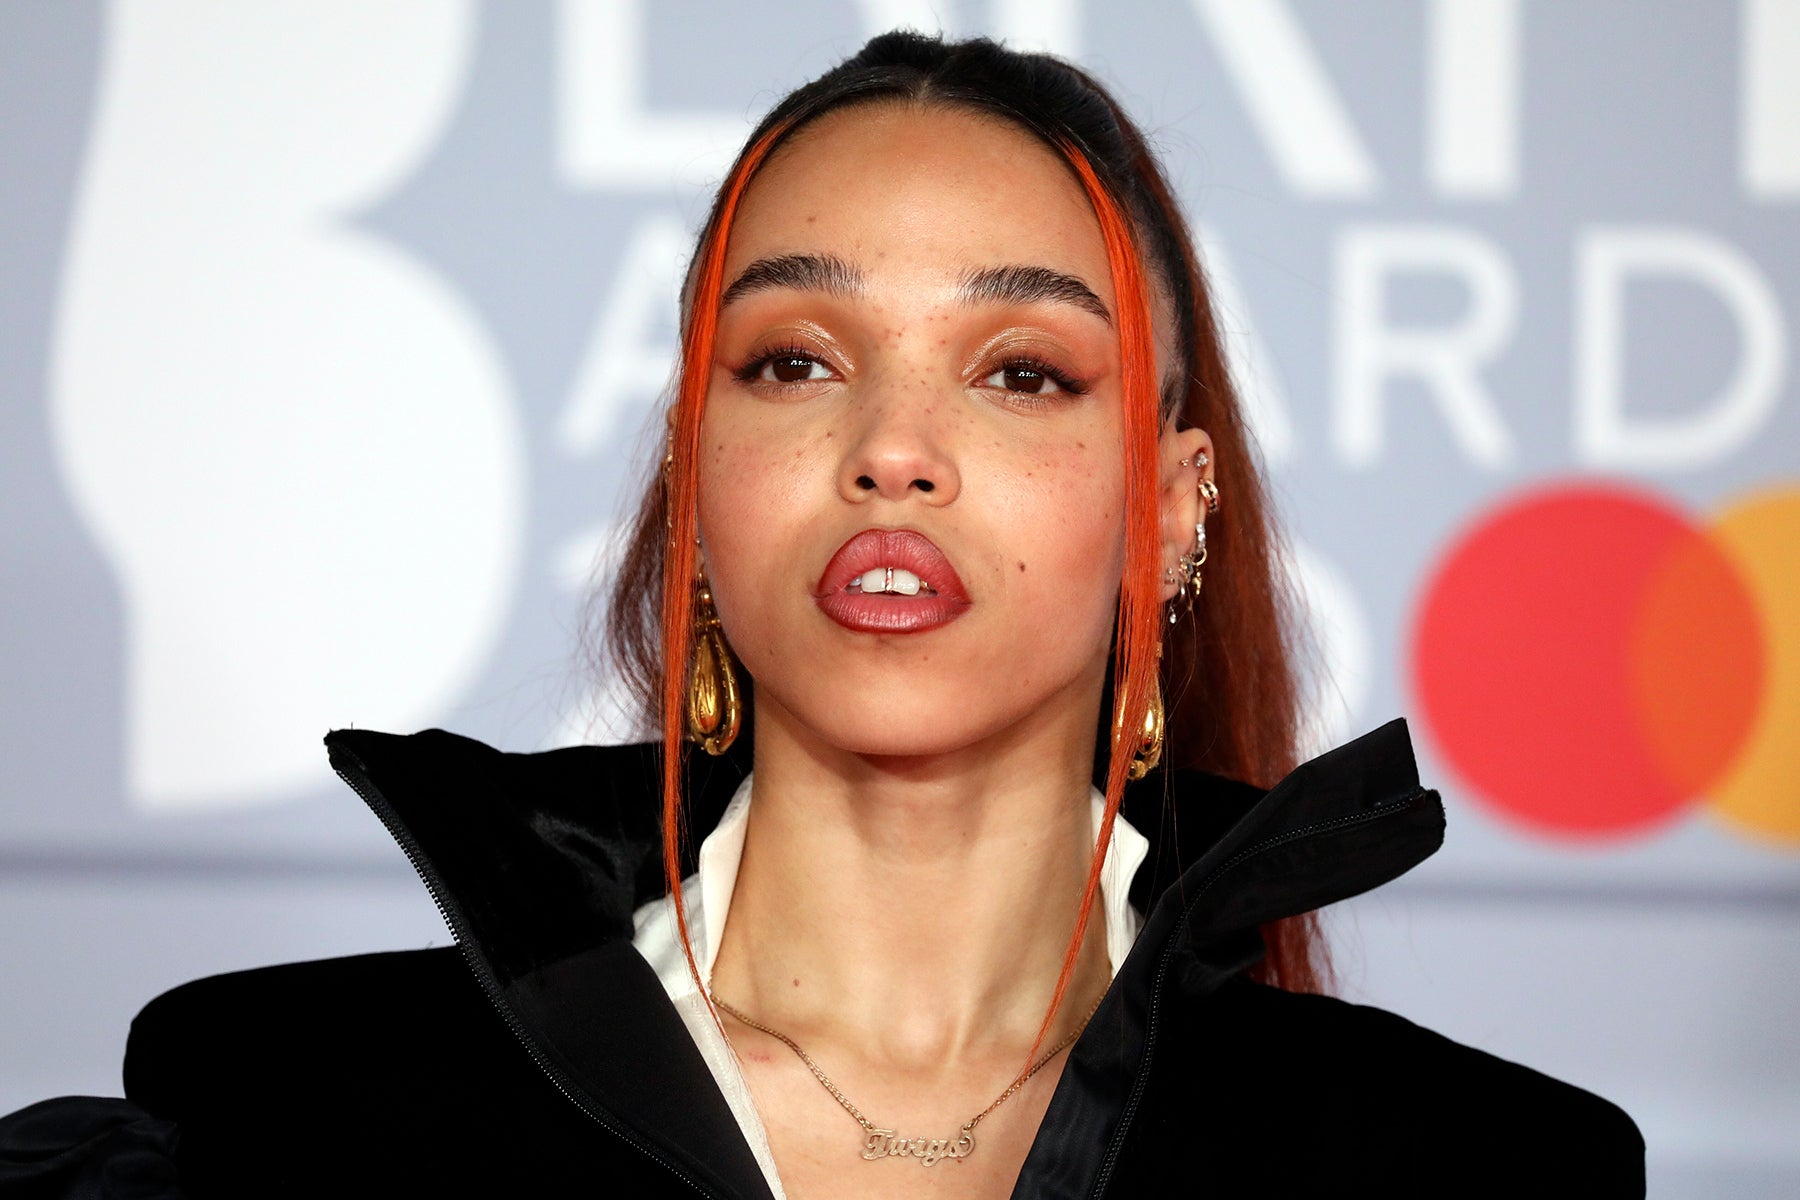 Singer FKA Twigs Sues Shia LaBeouf, Alleges He Physically Abused Her